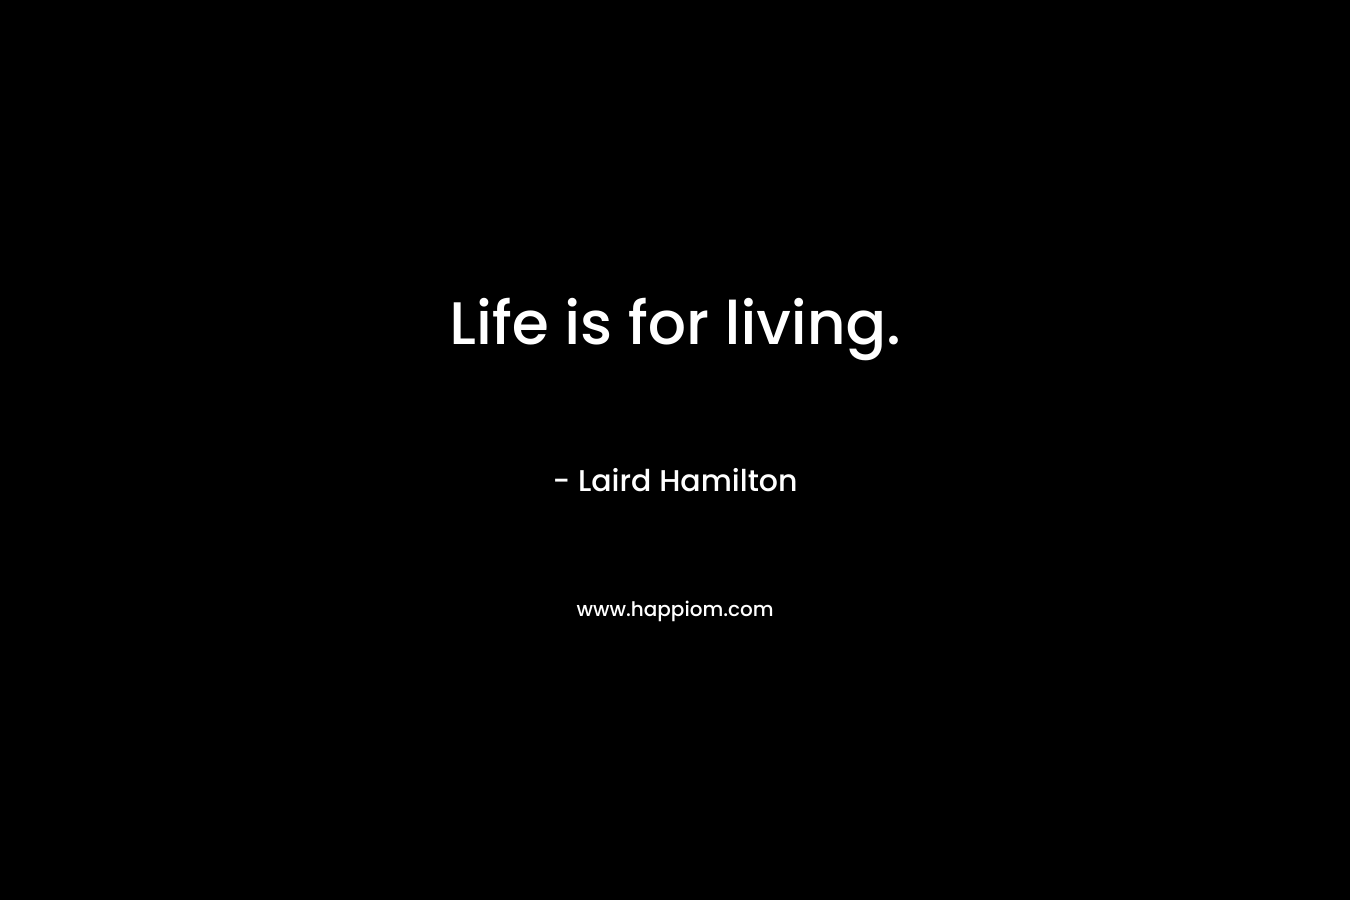 Life is for living.